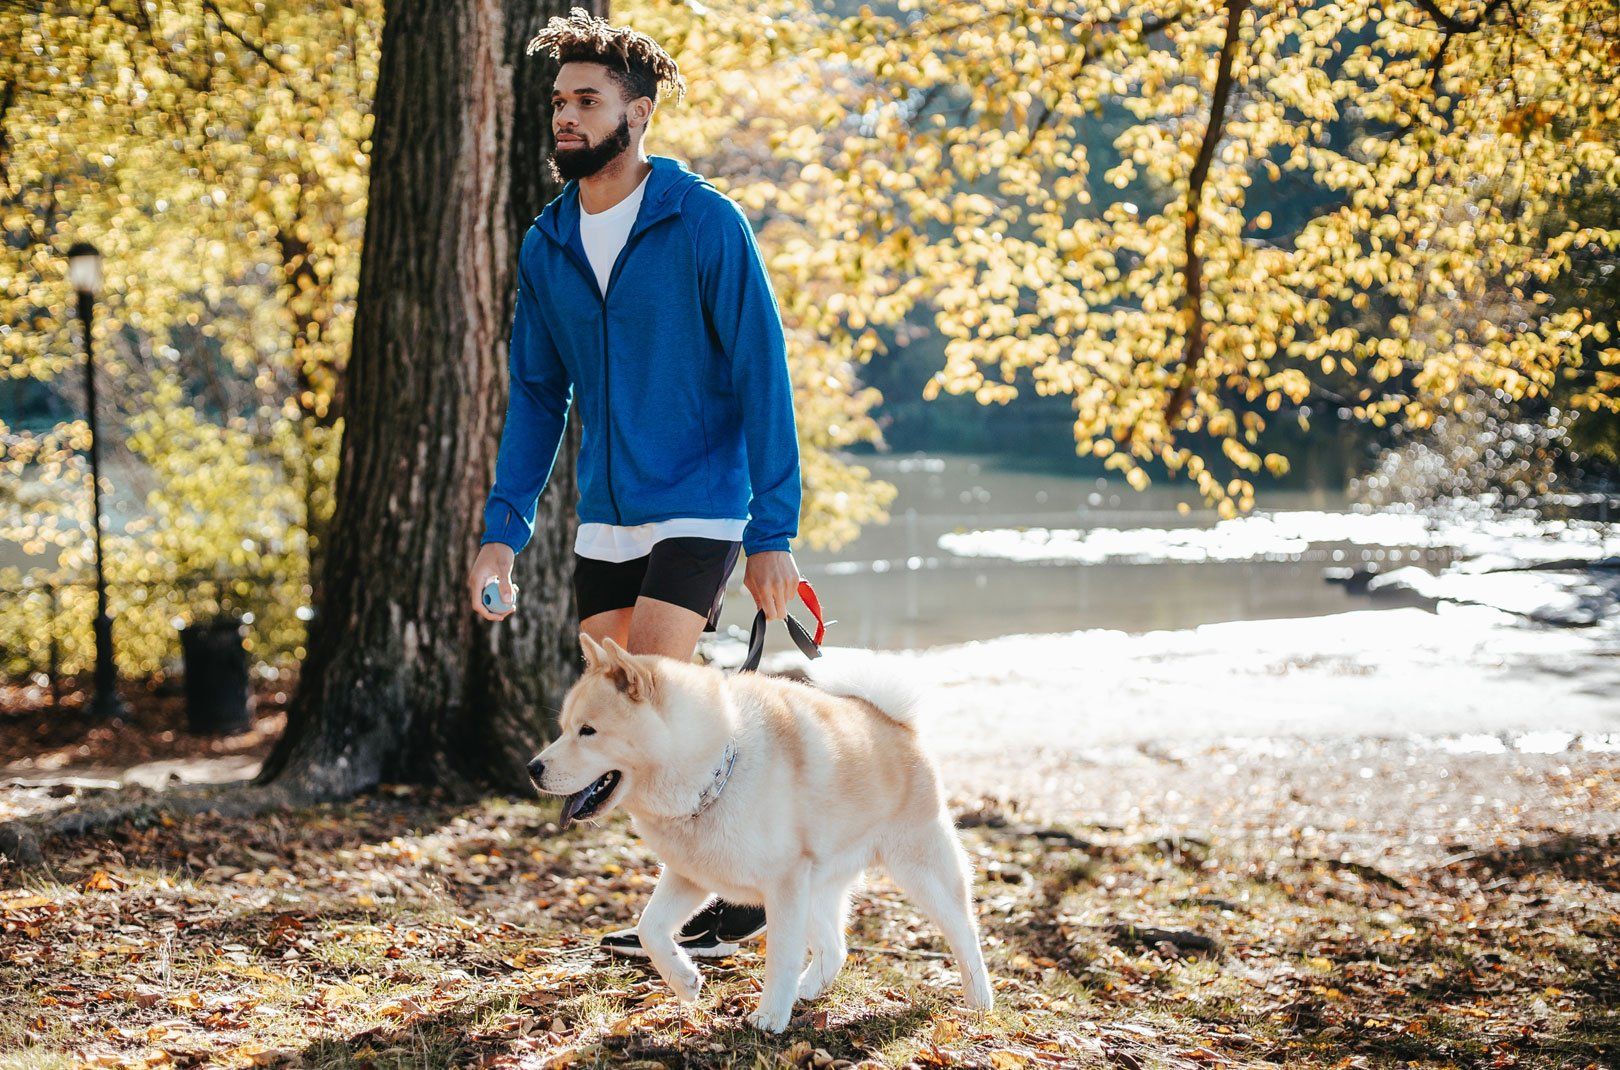 A person walking a dog in a forest.